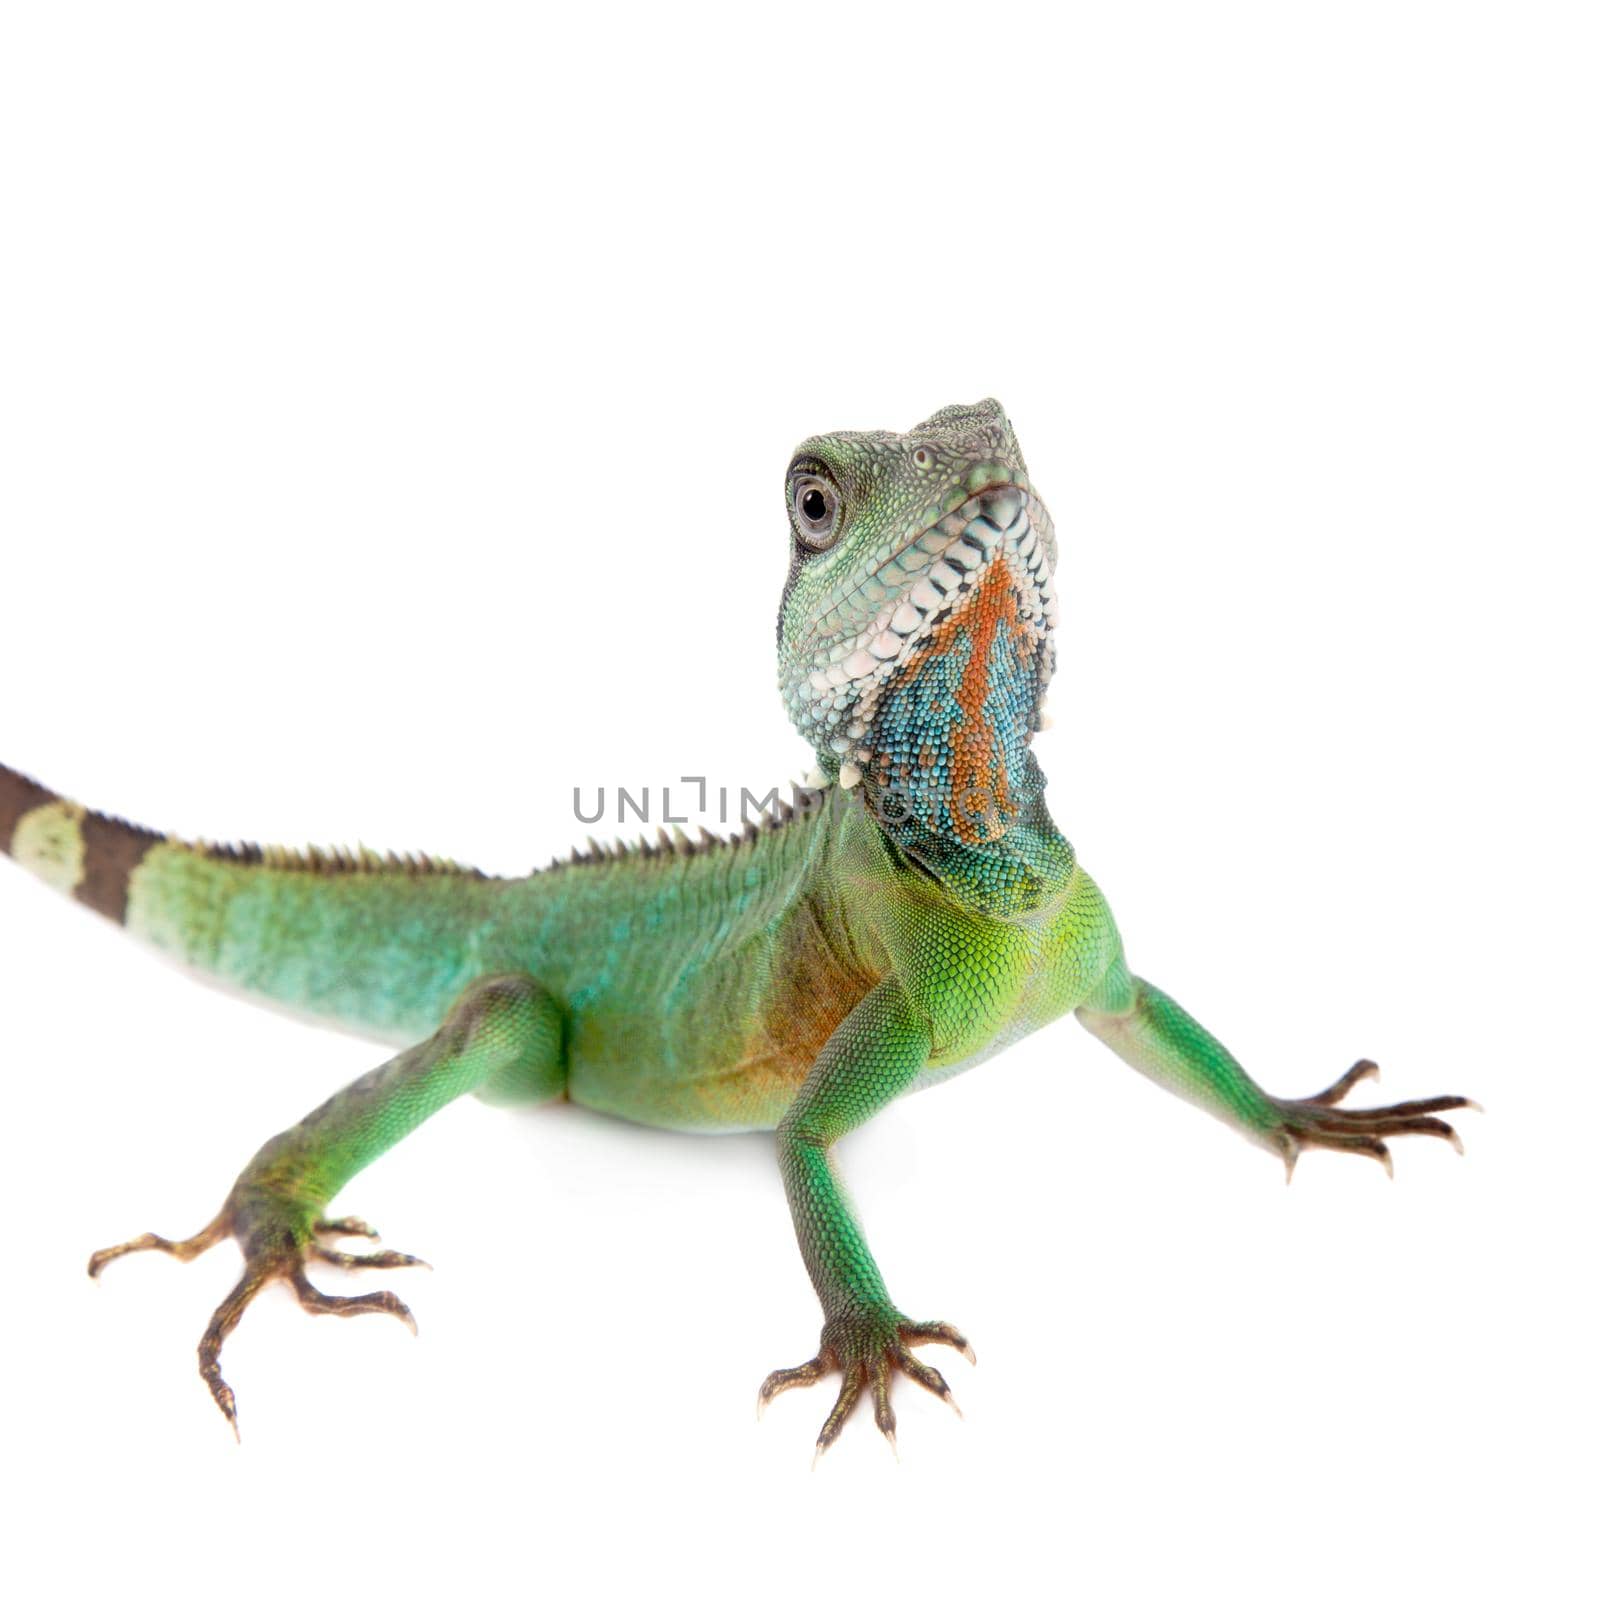 The Australian water dragon on white background by RosaJay